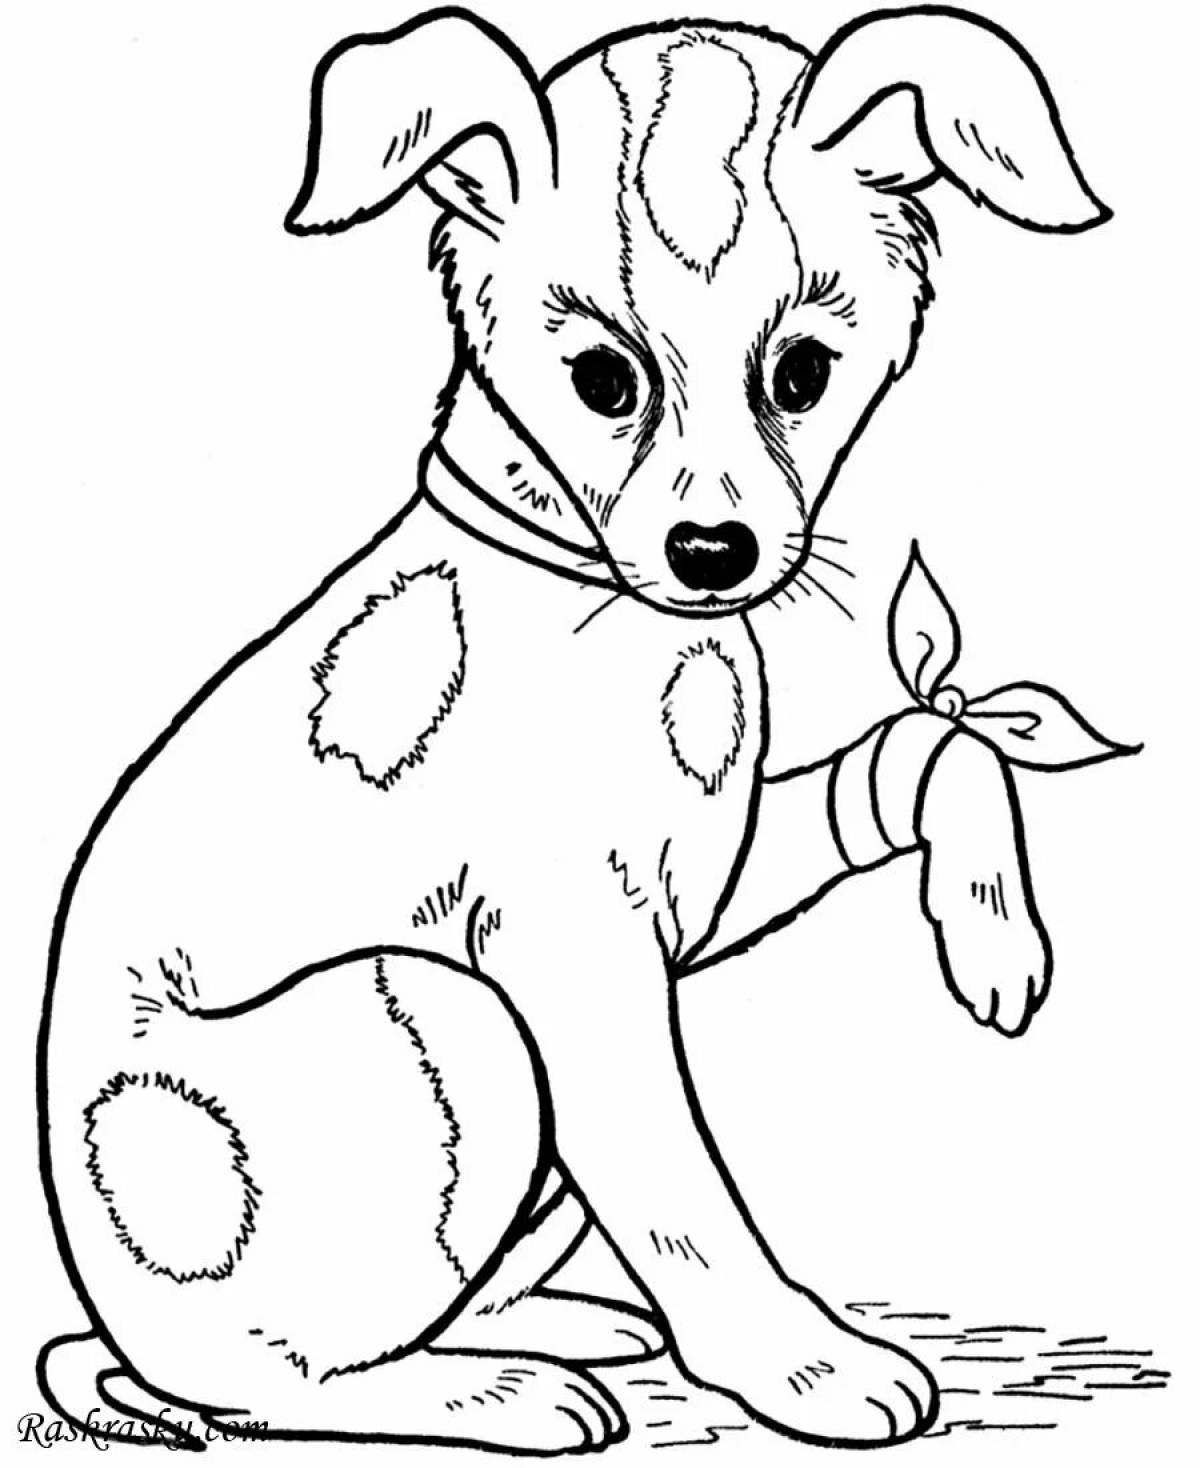 Romping coloring book for boys and dogs